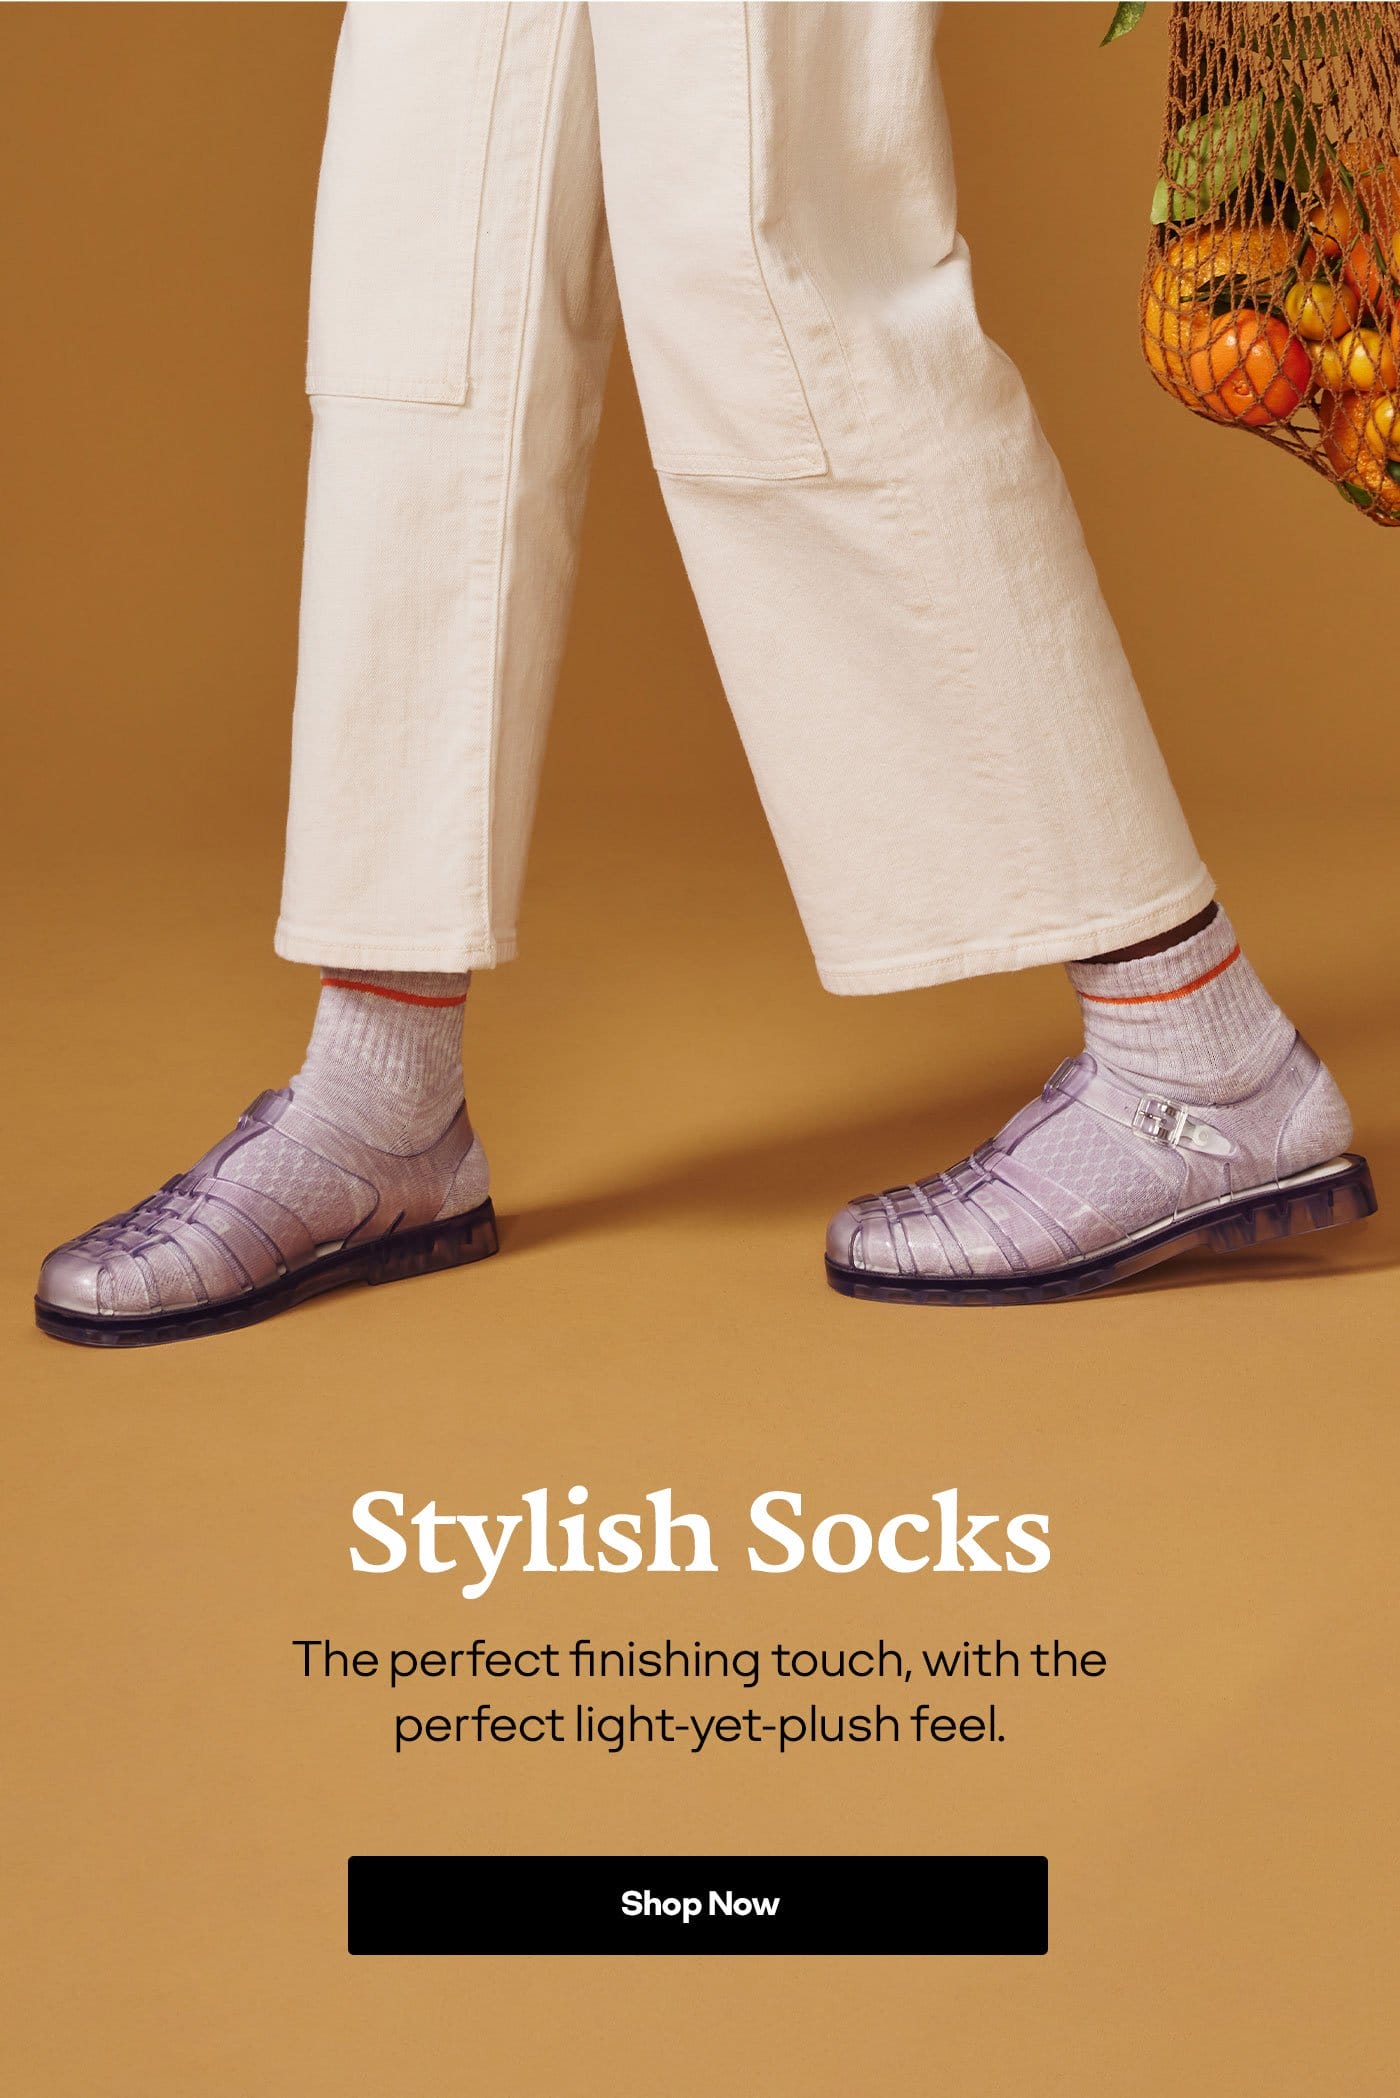 Stylish Socks | The perfect finishing touch, with the perfect light-yet-plush feel. | SHOP NOW